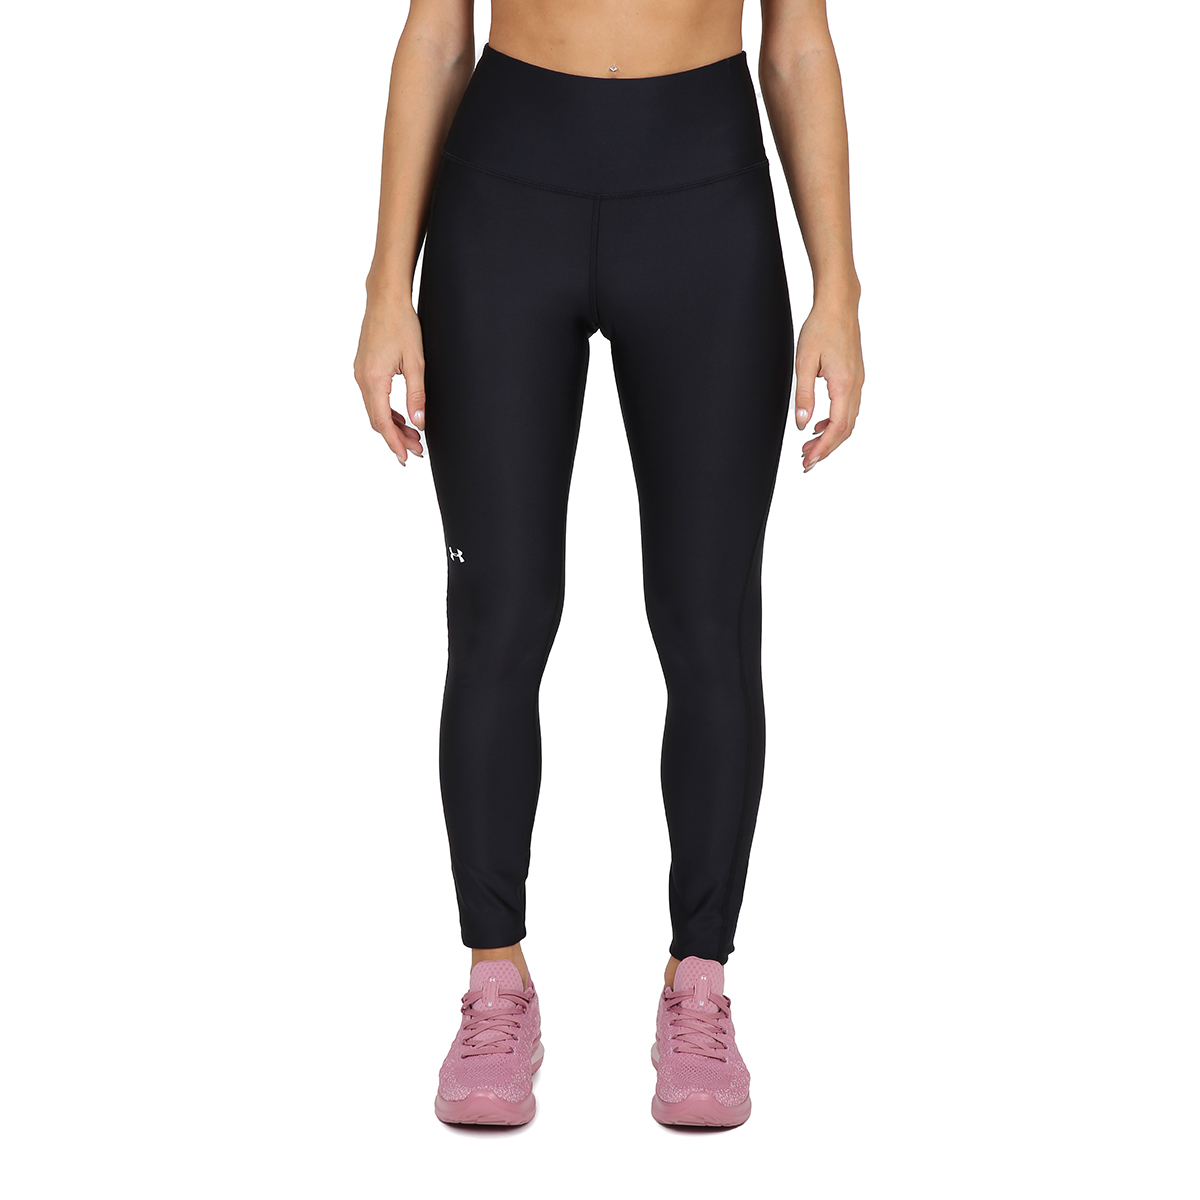 Calza Entrenamiento Under Armour Hi Rise Mujer,  image number null